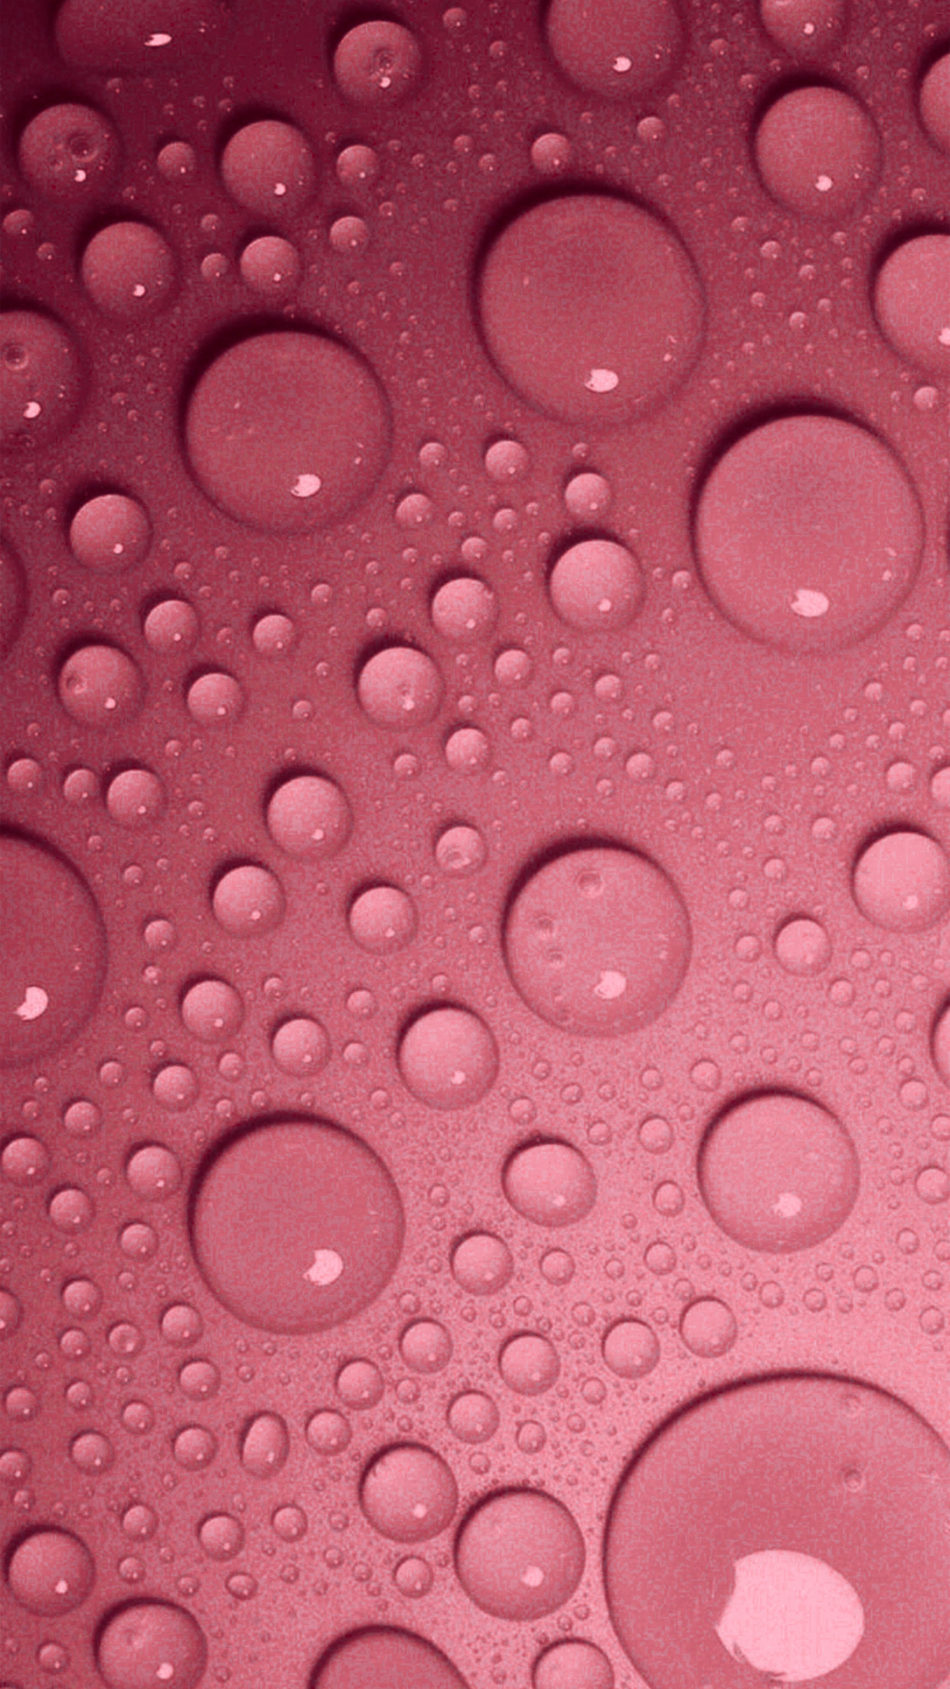 Water Drops Red Background 4K Ultra HD Mobile Wallpaper